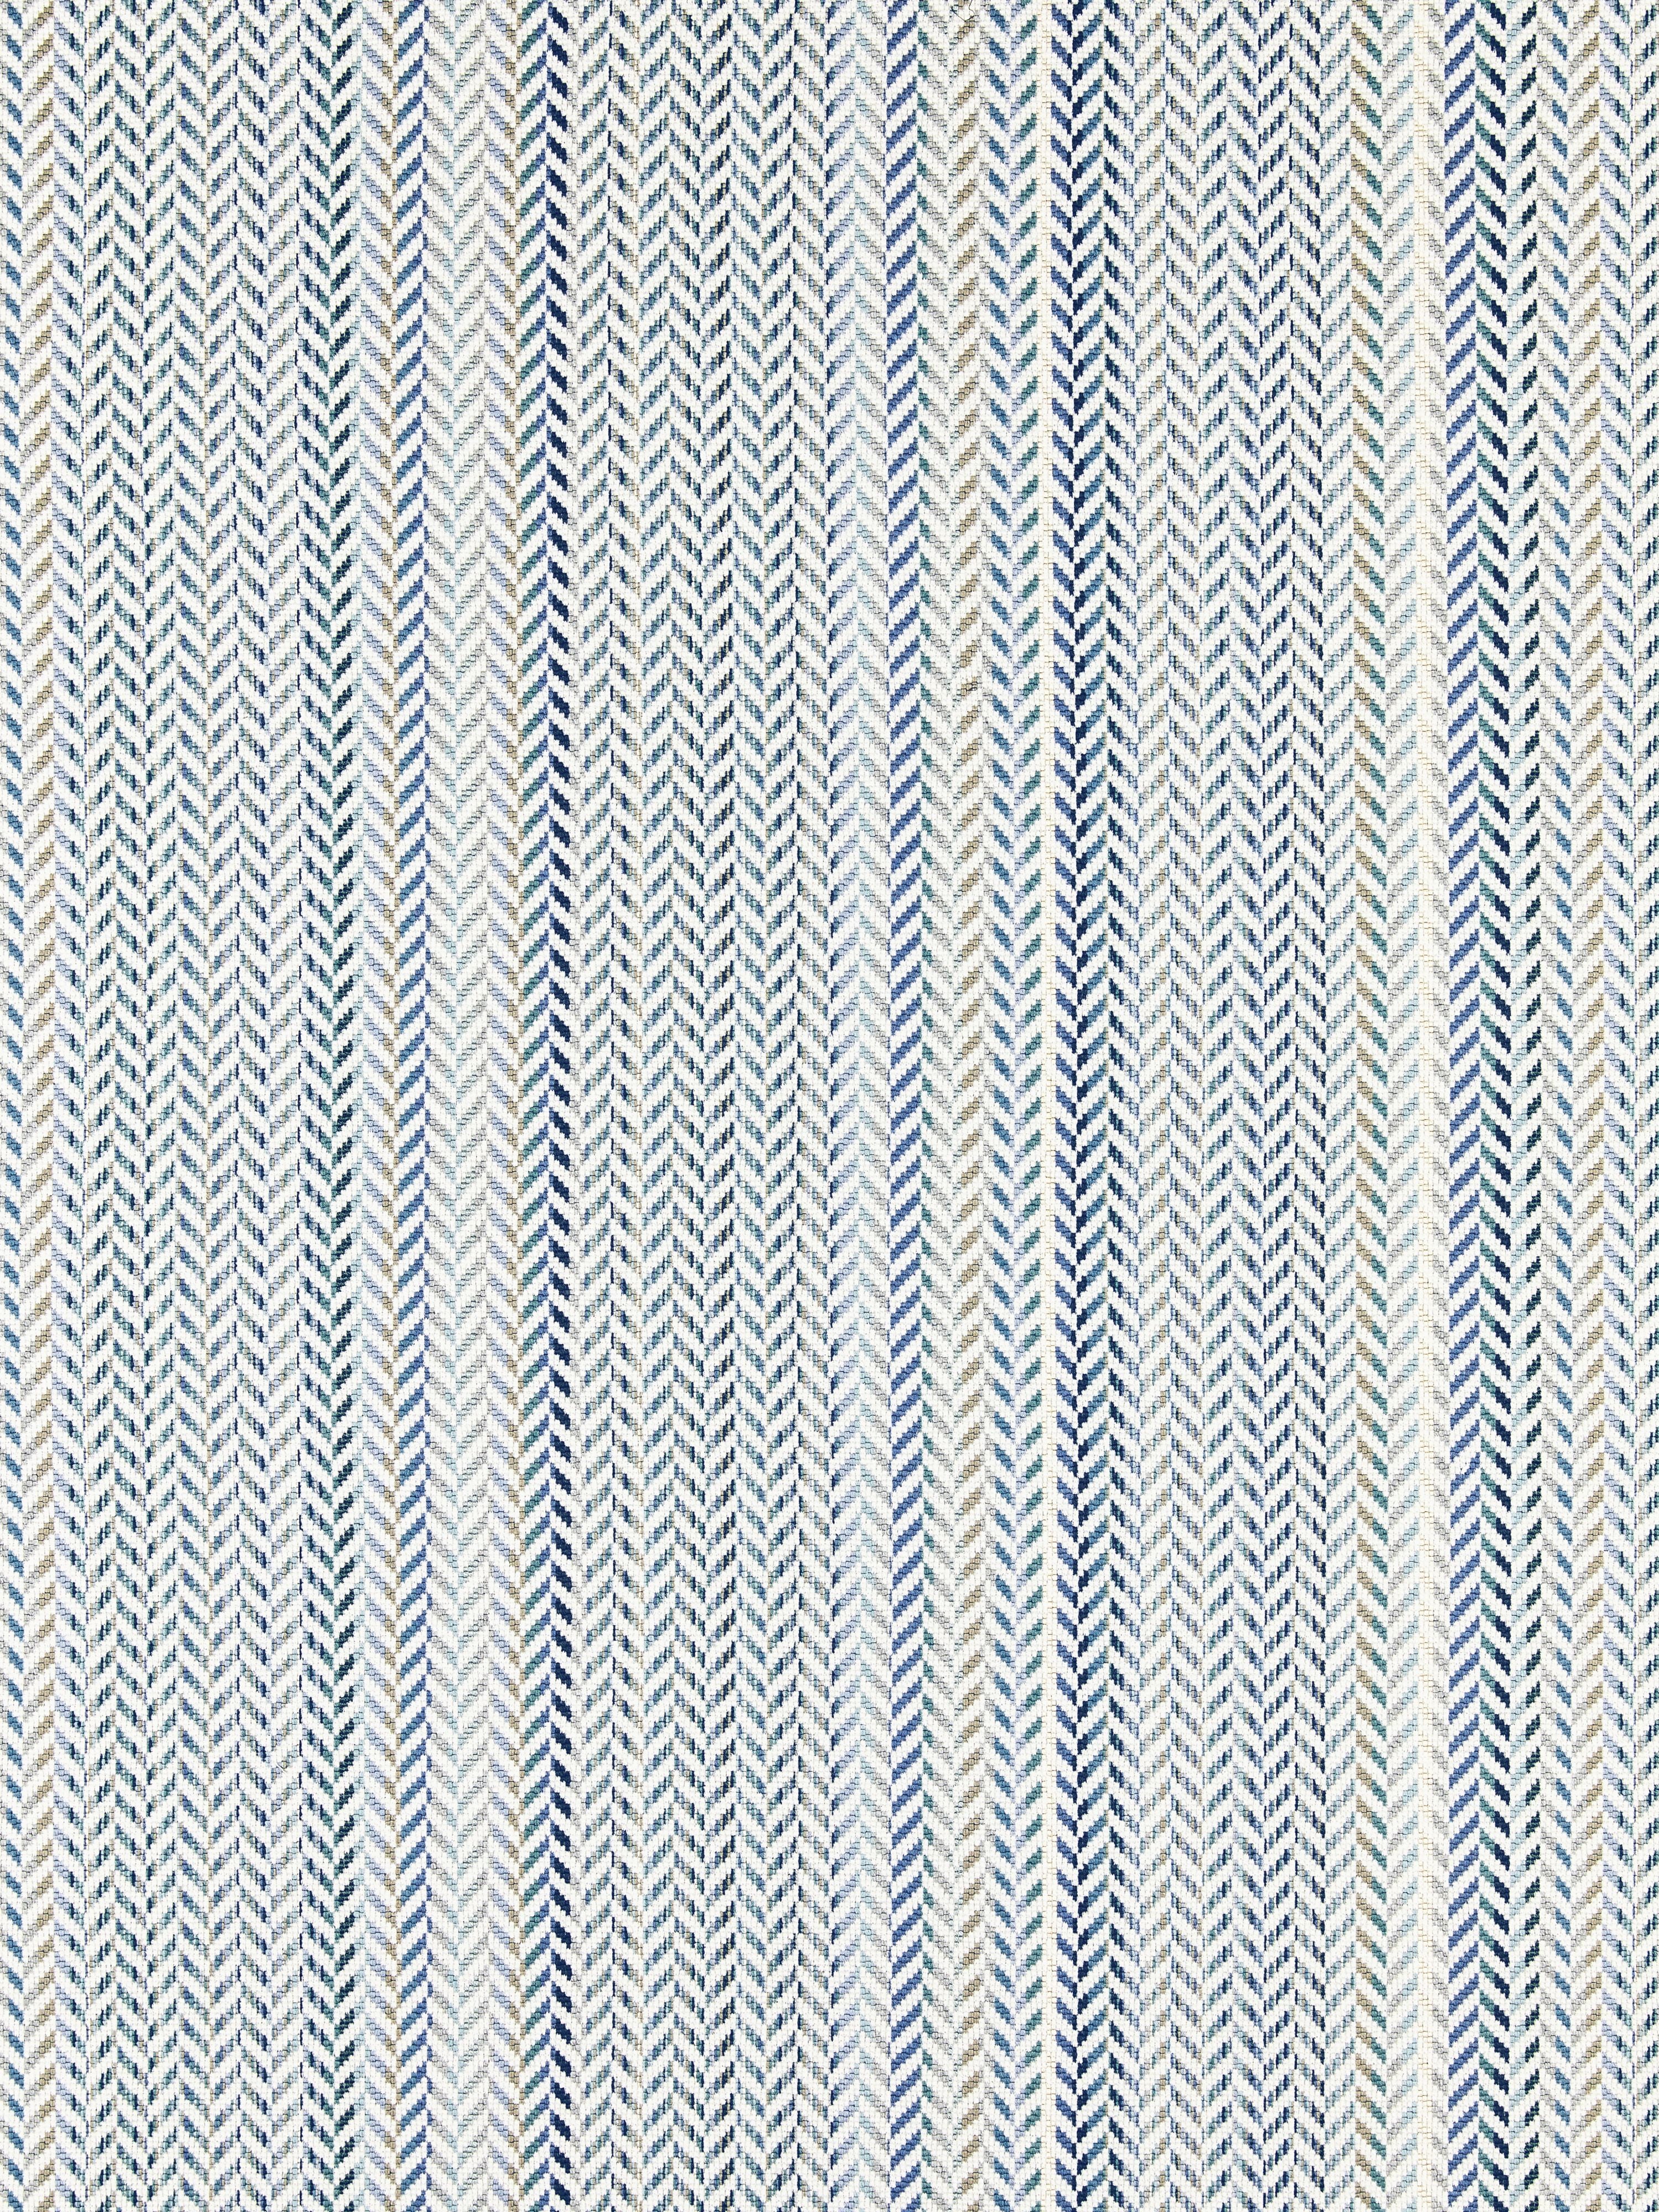 Arrow Stripe fabric in fountain color - pattern number SC 000227254 - by Scalamandre in the Scalamandre Fabrics Book 1 collection